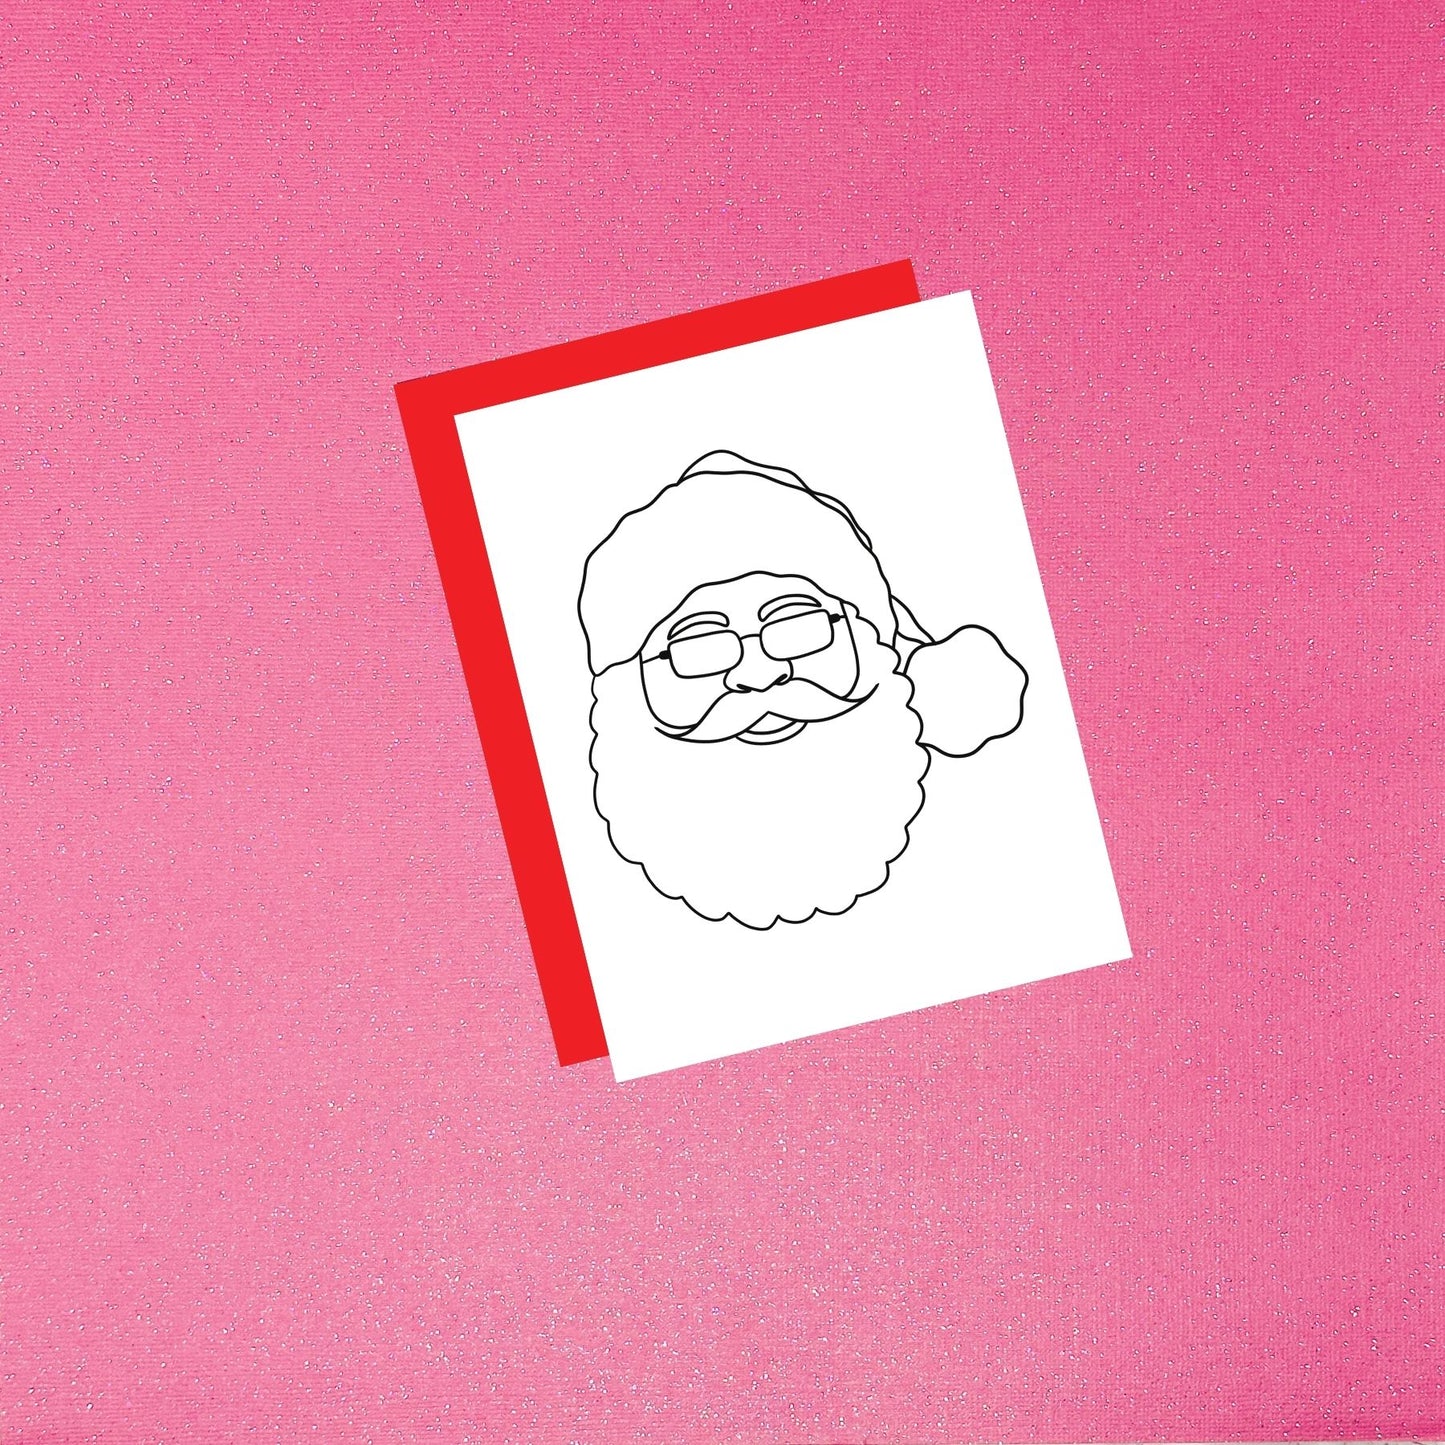 Coloring Card - Color Your Own Santa Claus